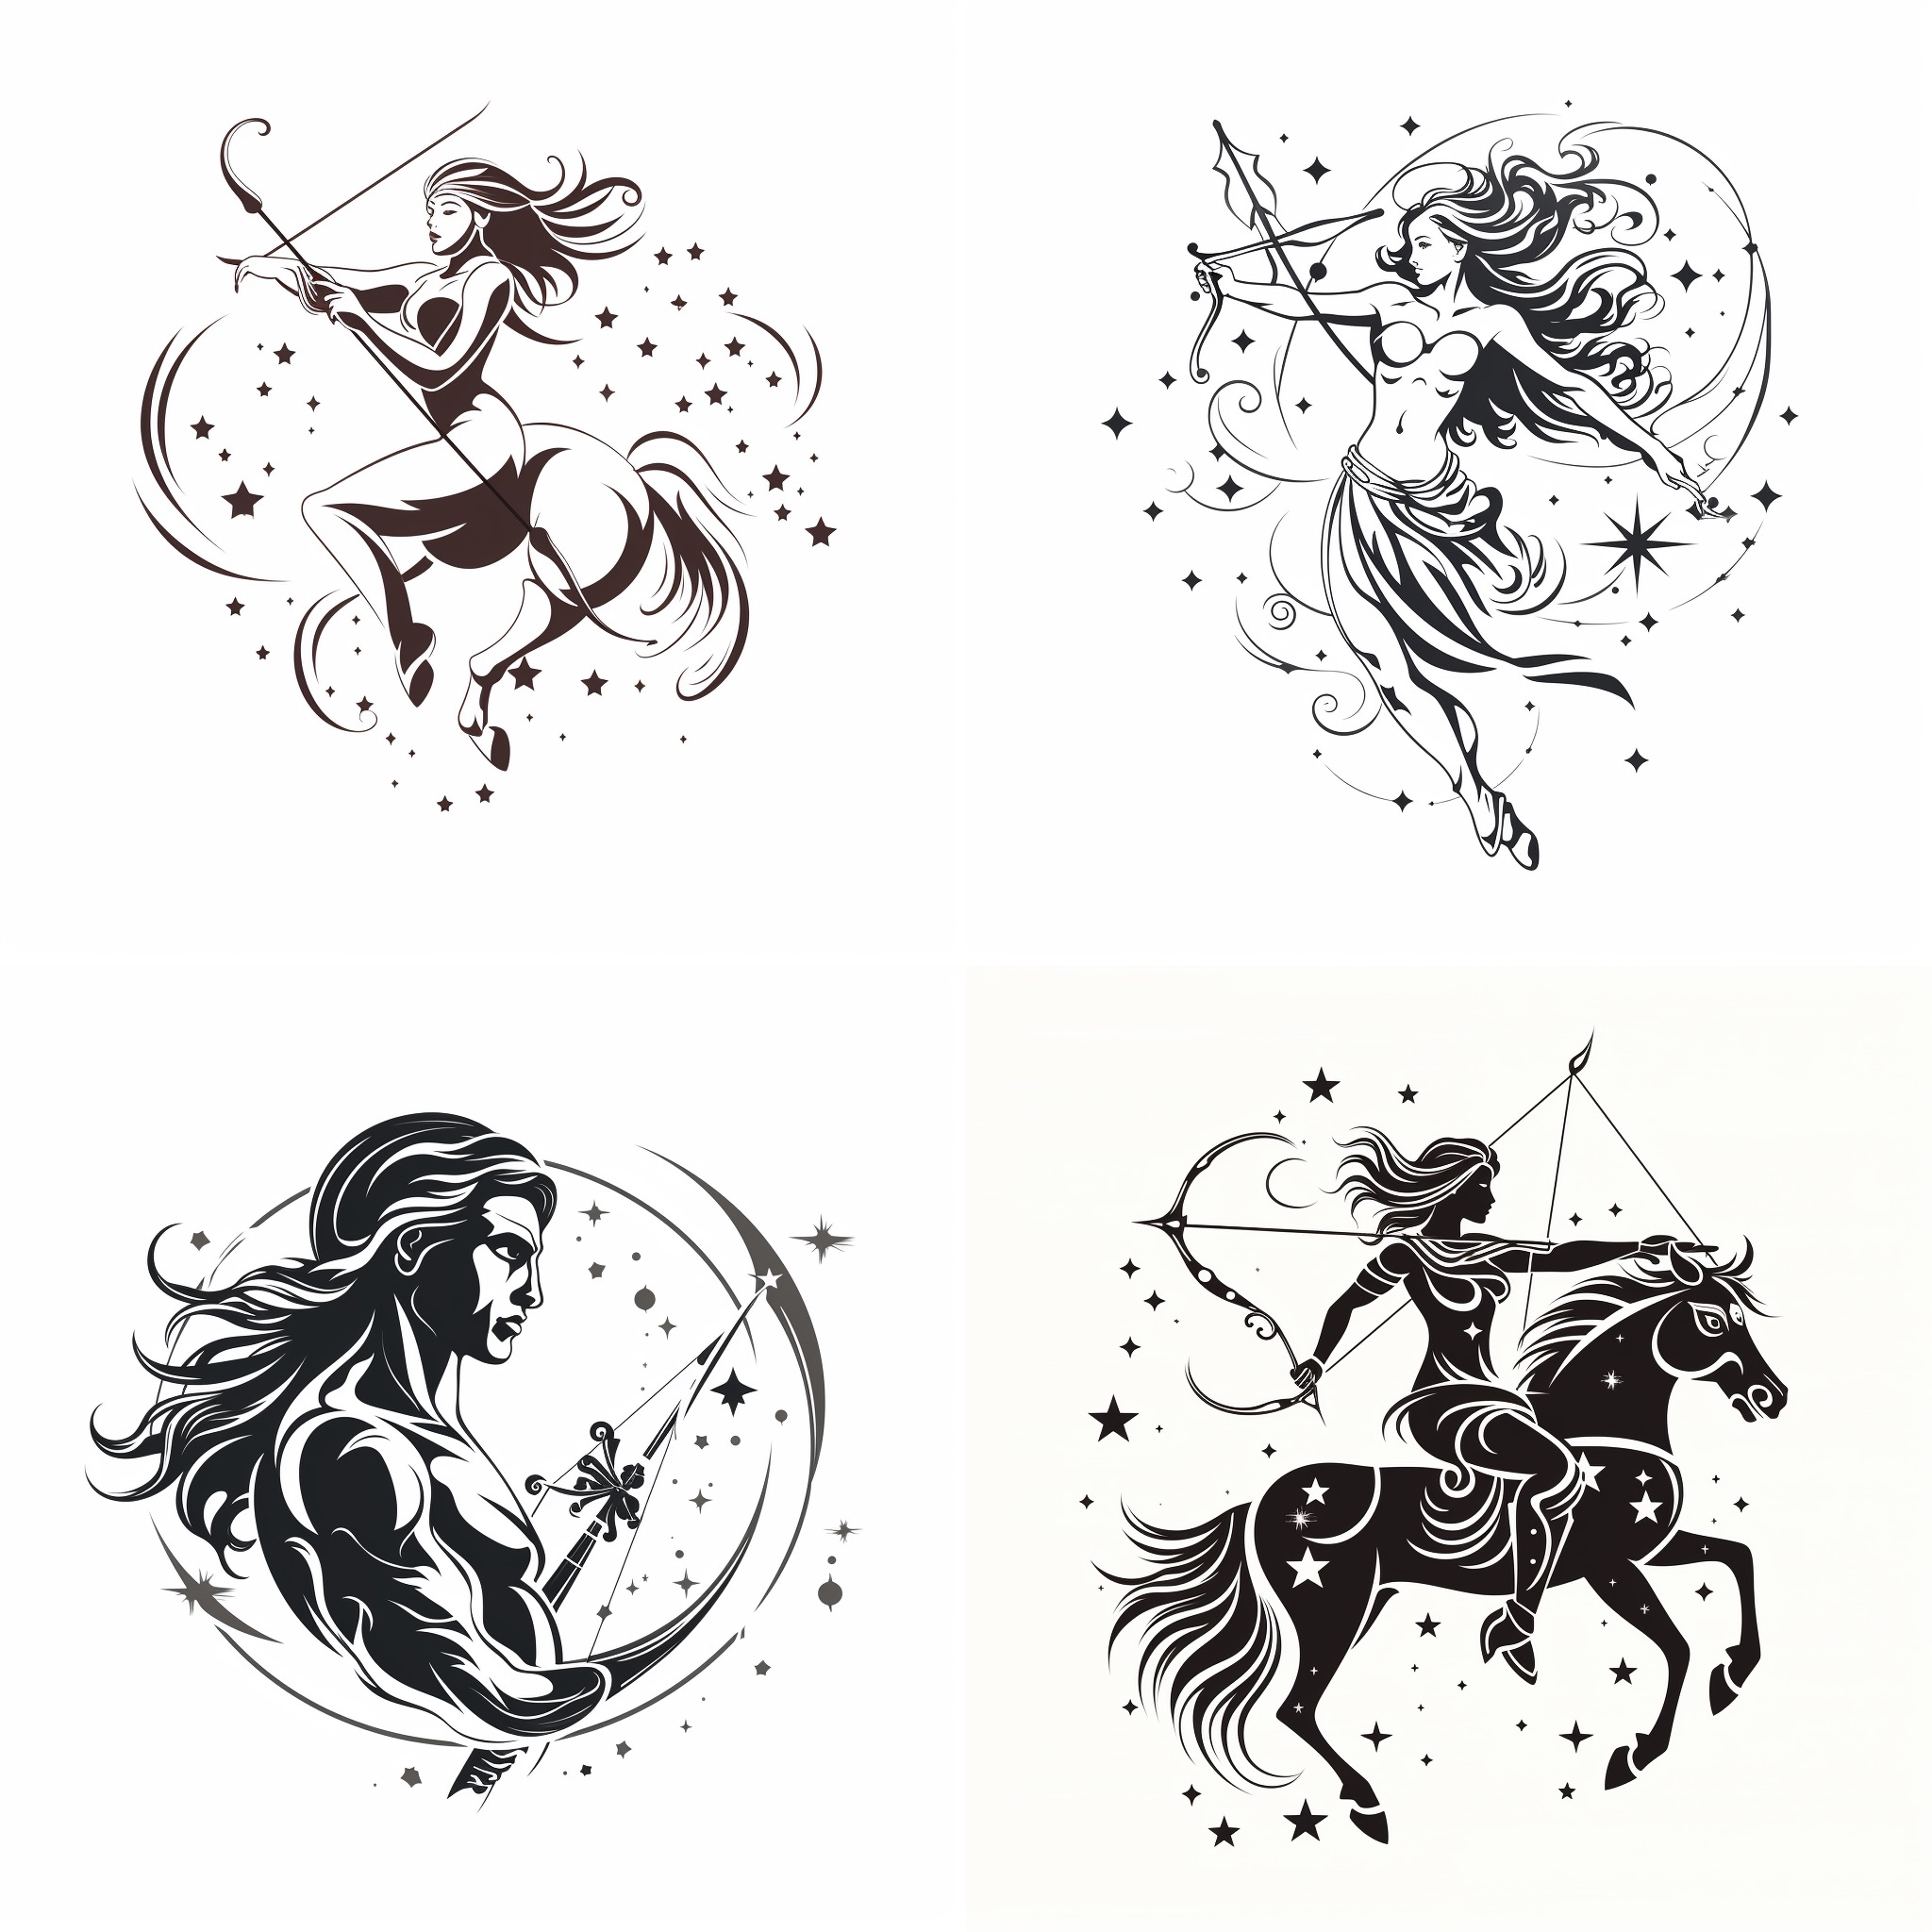 Printable Tattoo Stencils - You'll Want To Read This Carefully